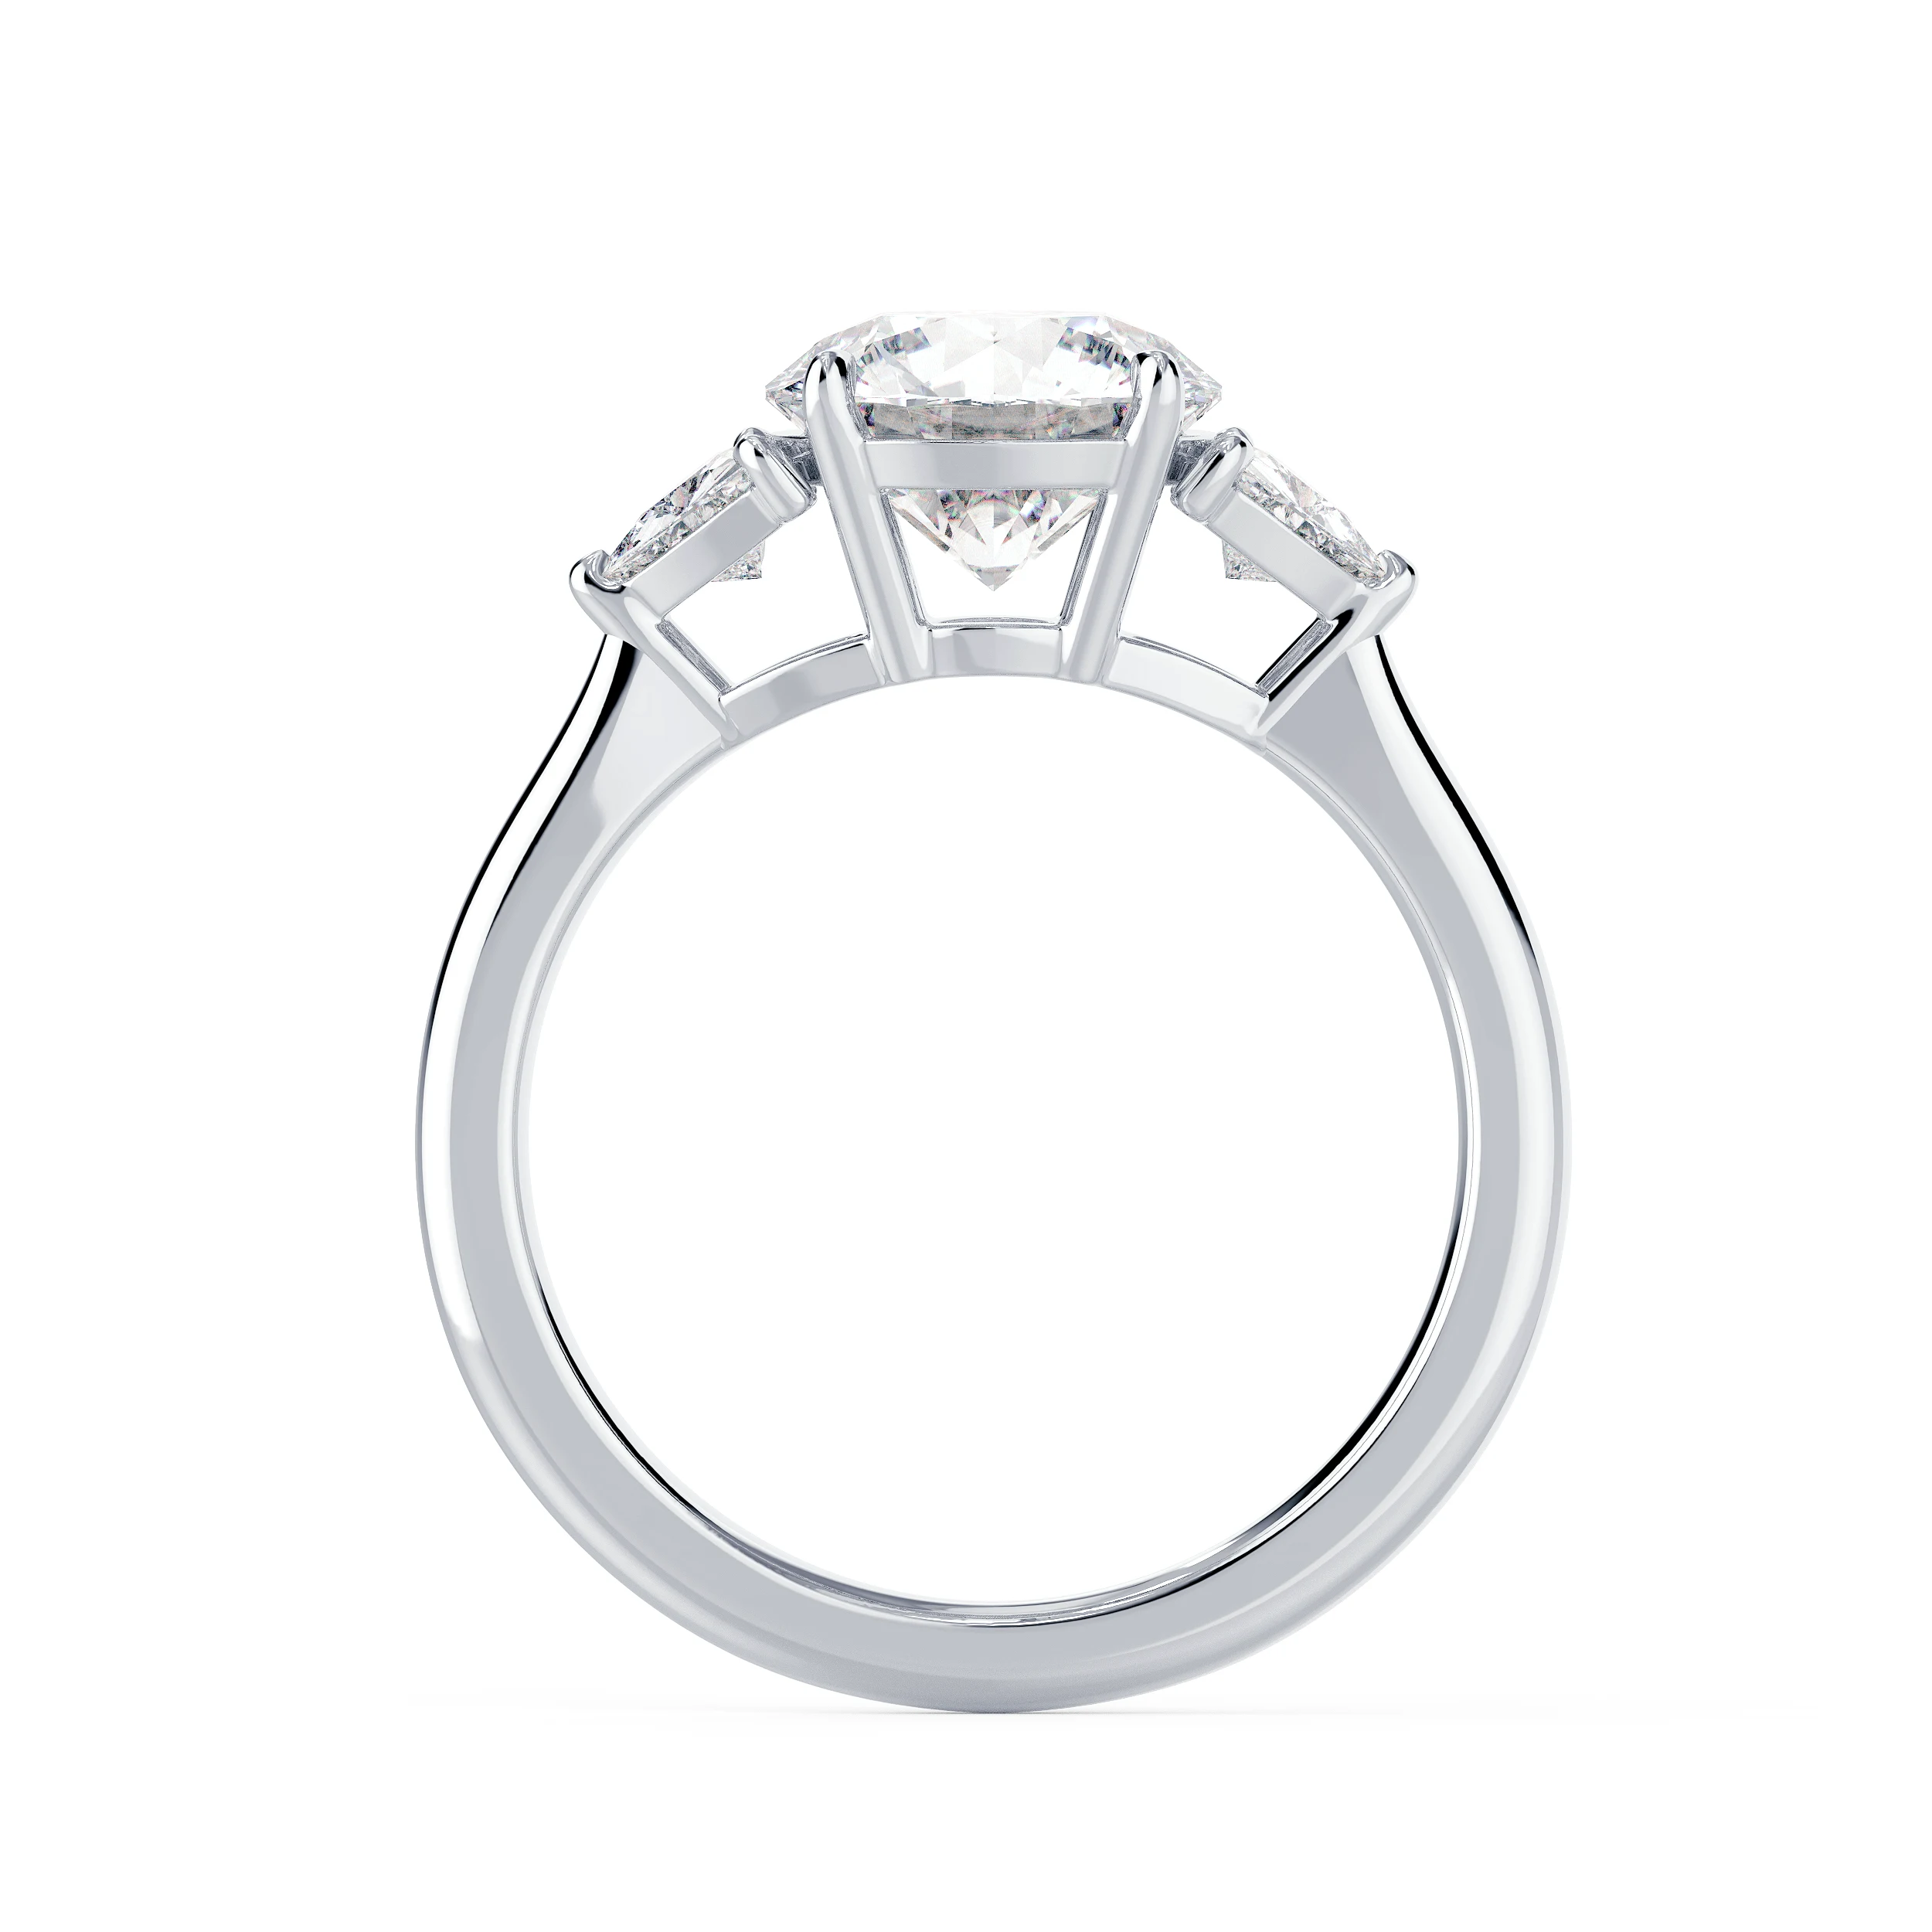 Diamonds set in White Gold Round and Trillion Diamond Engagement Ring (Profile View)